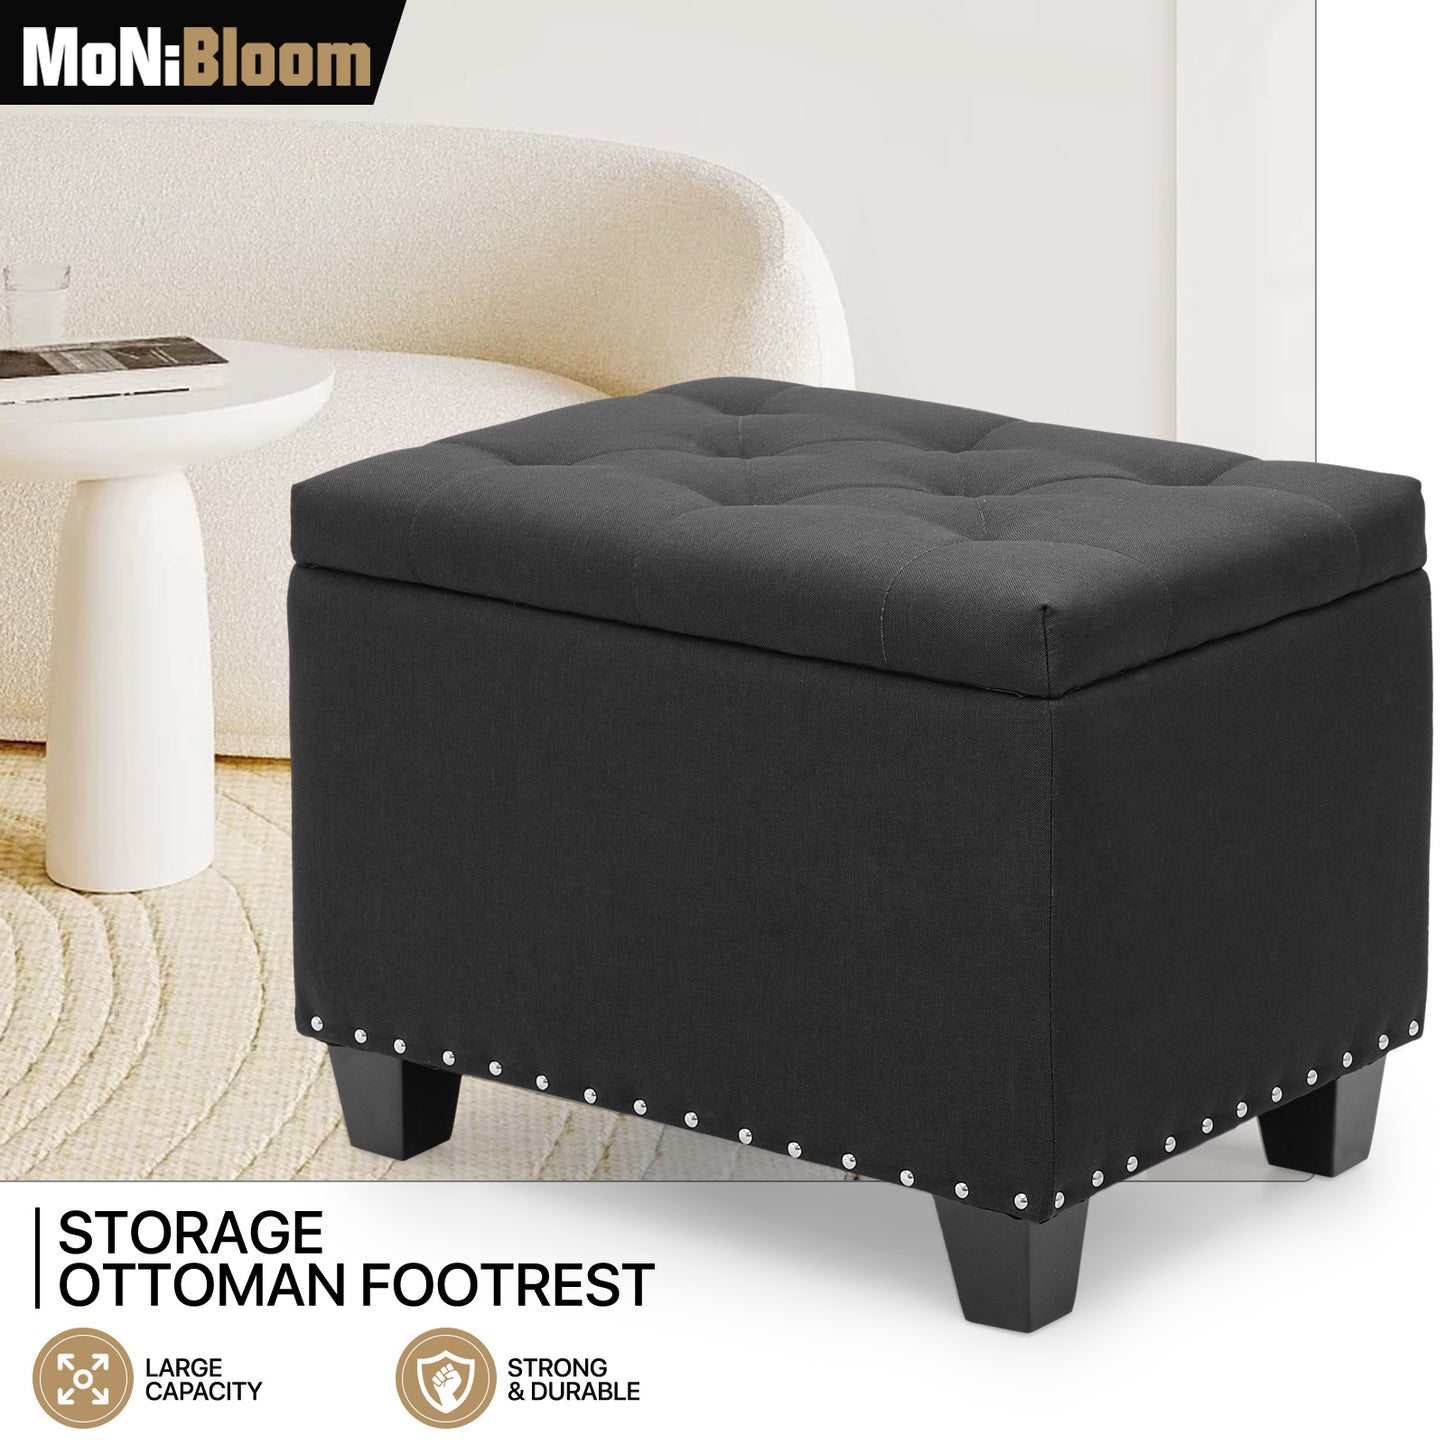 24" Storage Bench Lift Top Tufted Poufs Ottoman Upholstered Footrest Stool